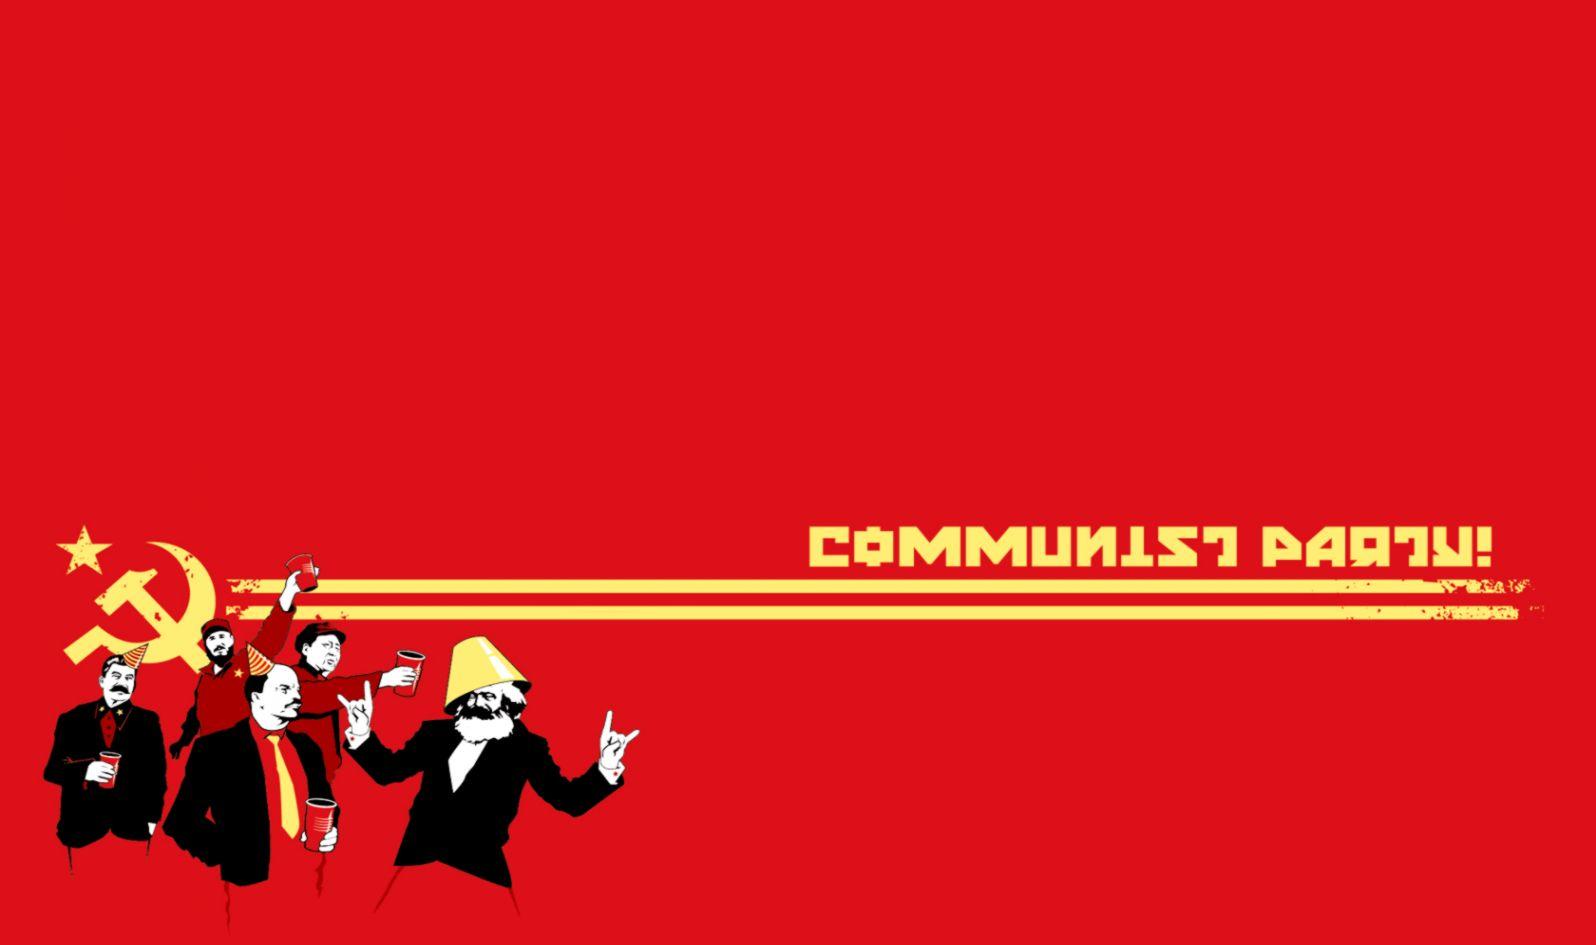 Communist Wallpapers Top Free Communist Backgrounds Images, Photos, Reviews